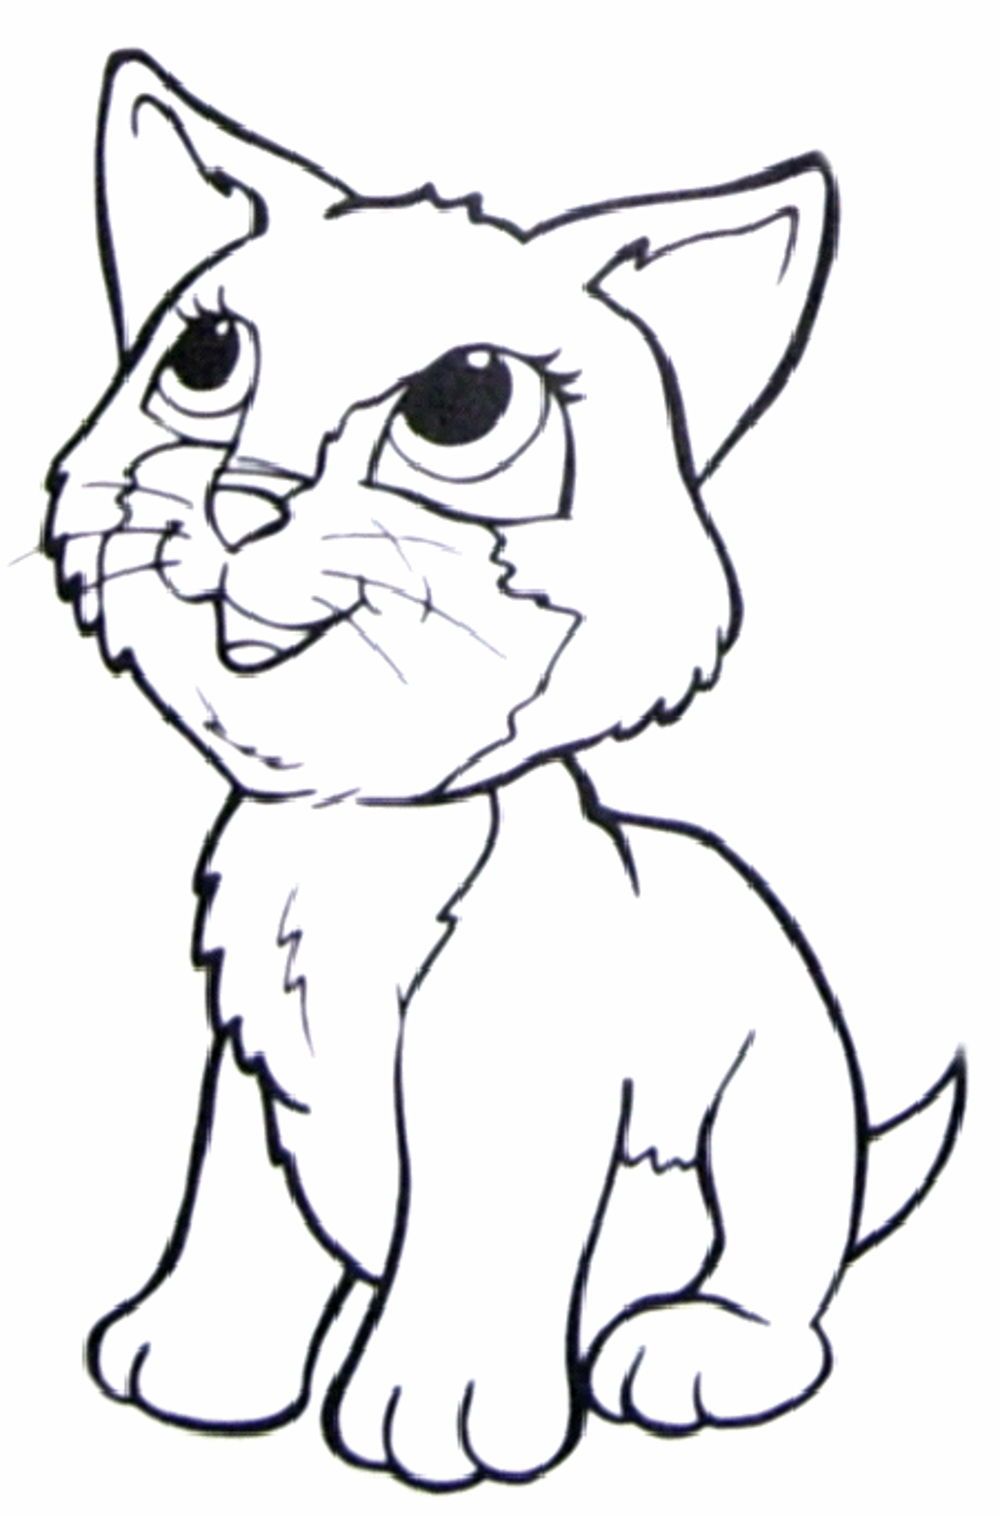 Siamese Cat Coloring Page at GetColorings.com | Free ...